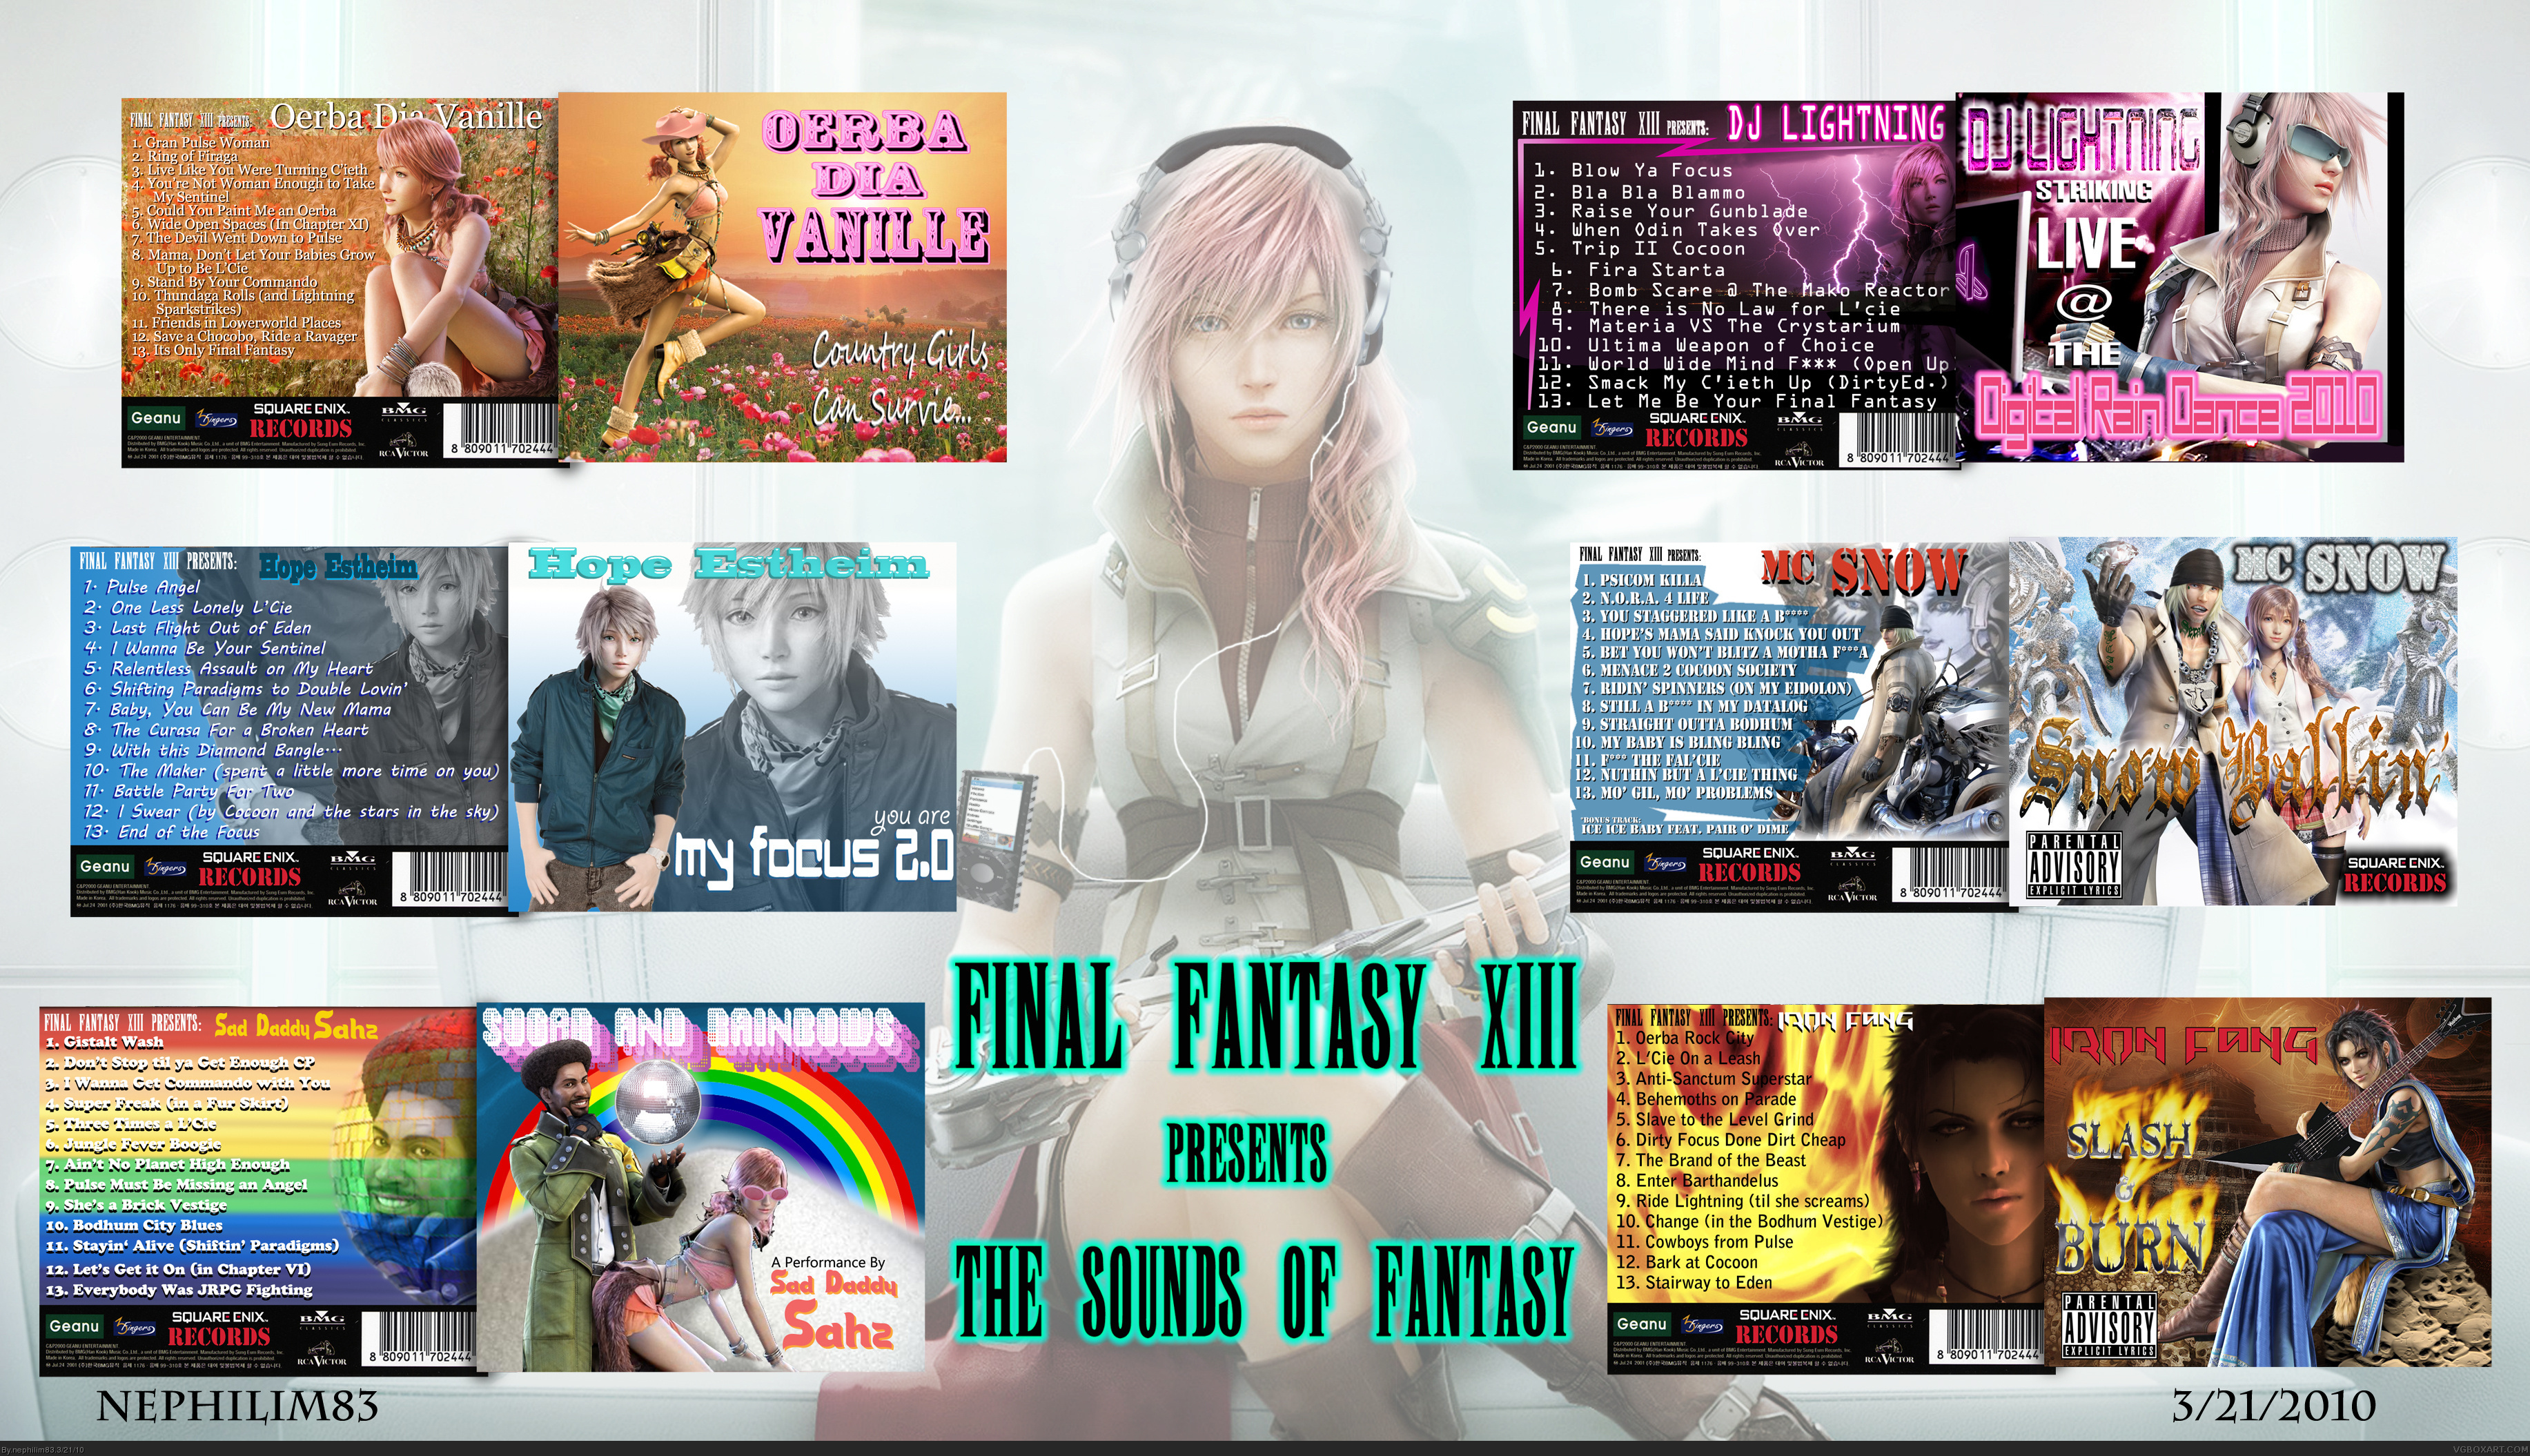 Final Fantasy XIII - The Sounds of Fantasy box cover